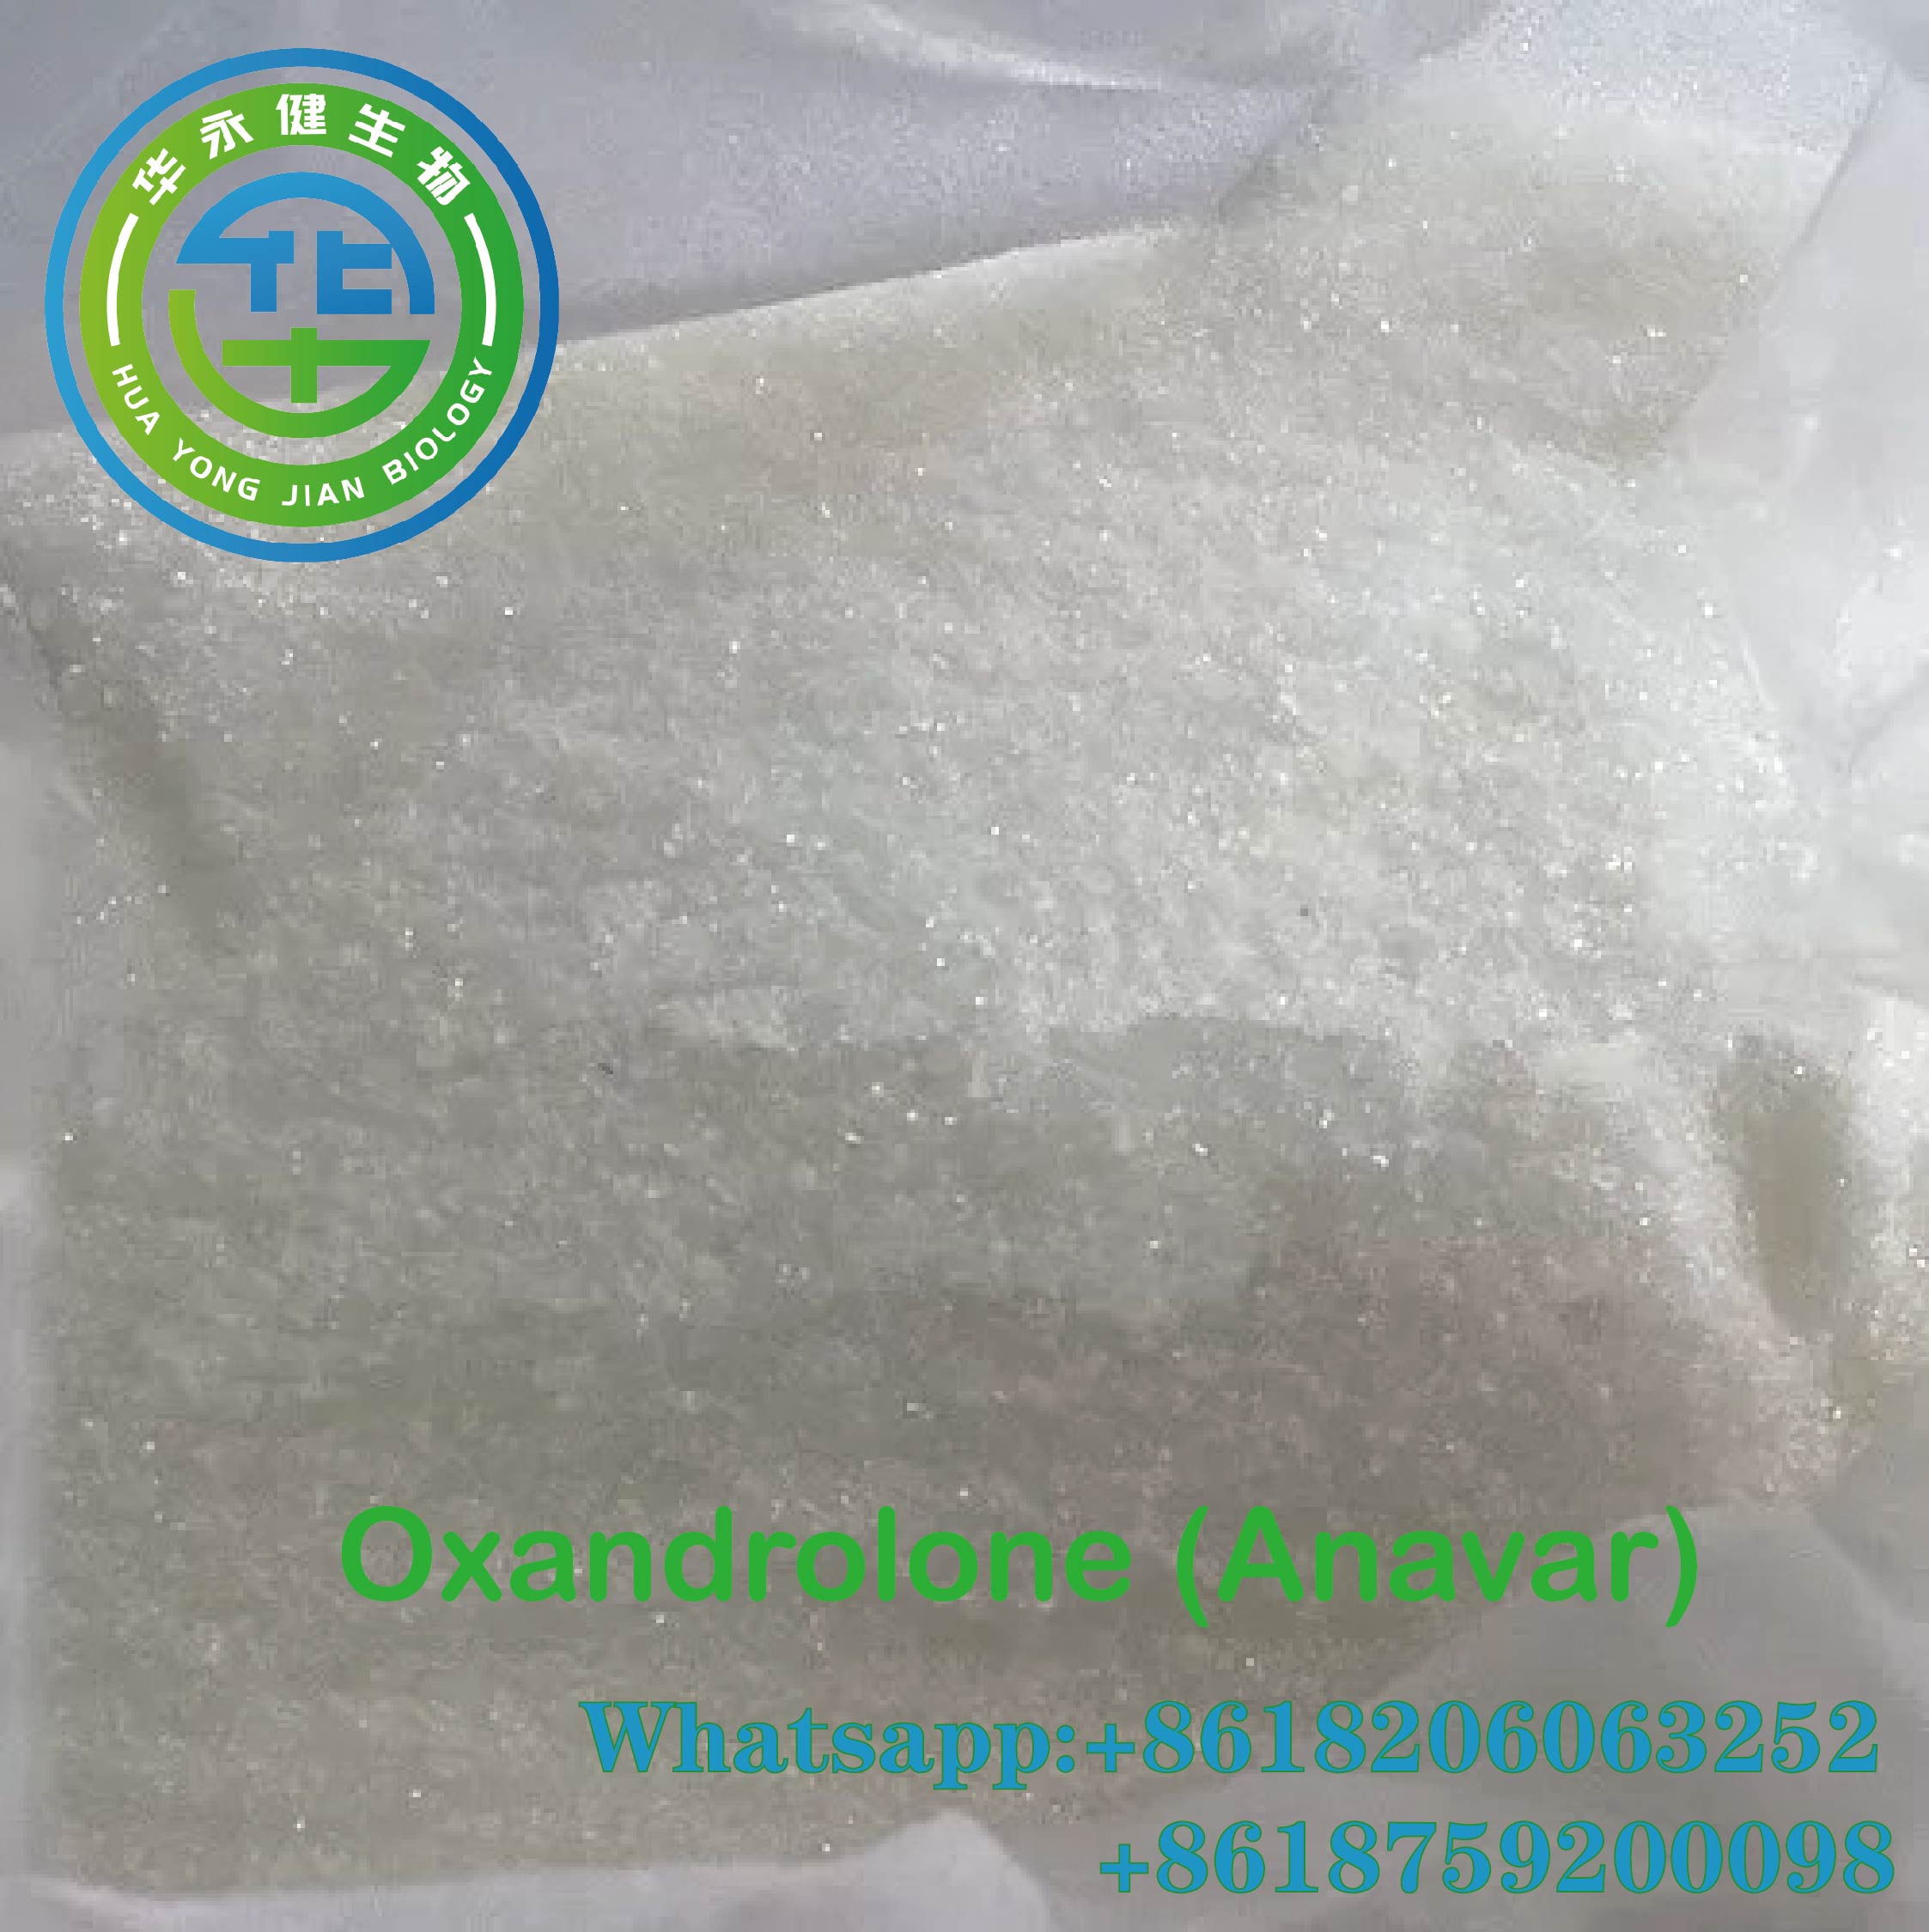 Oxandrolone / Anavar Anabolic Oral Steroids CAS 53-39-4 Bodybuilding Supplement